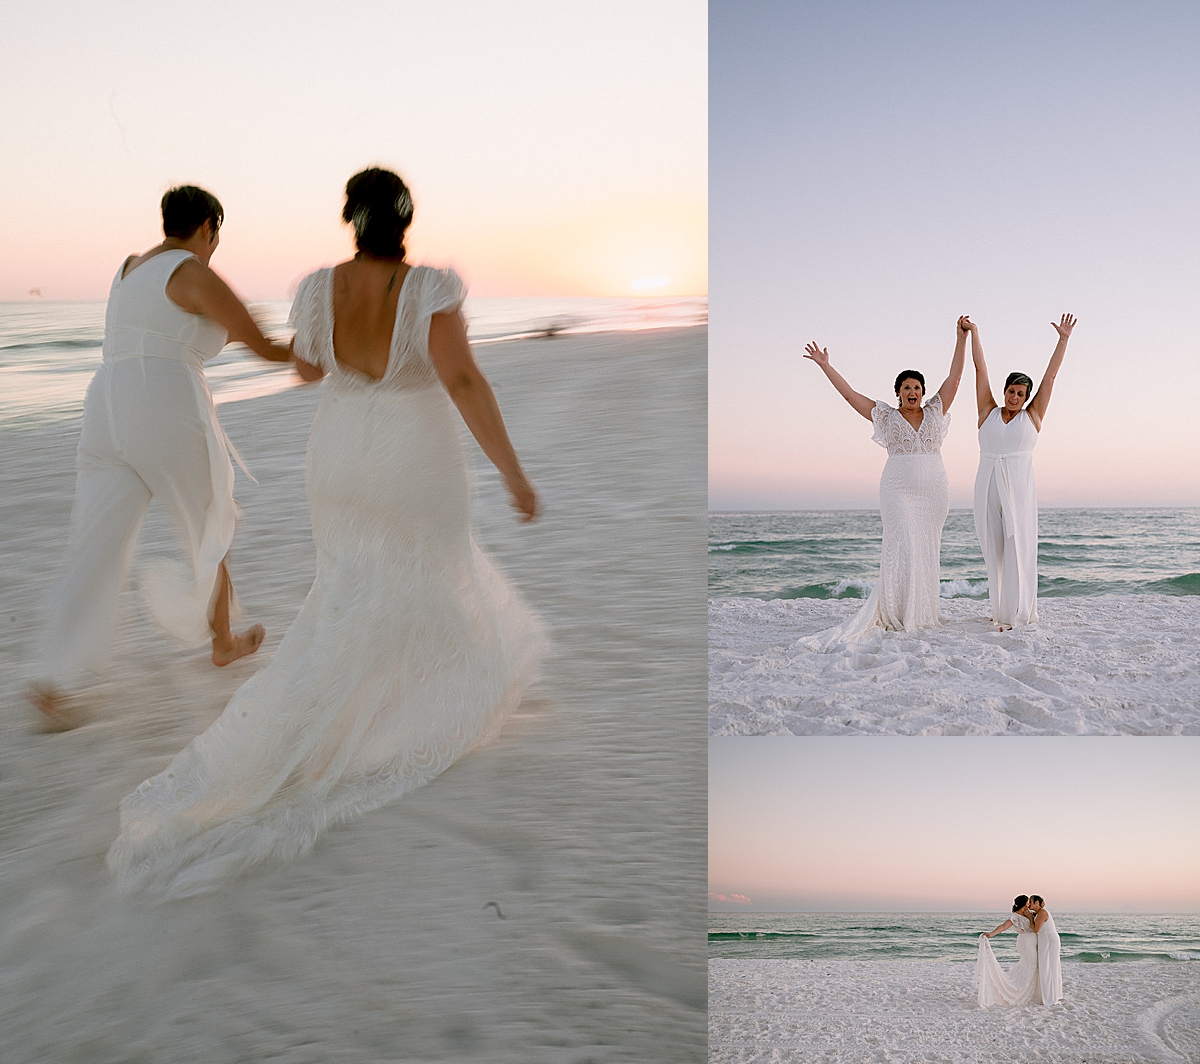 Blurry couple photo on wedding day with brides running on the beach for Destin micro wedding